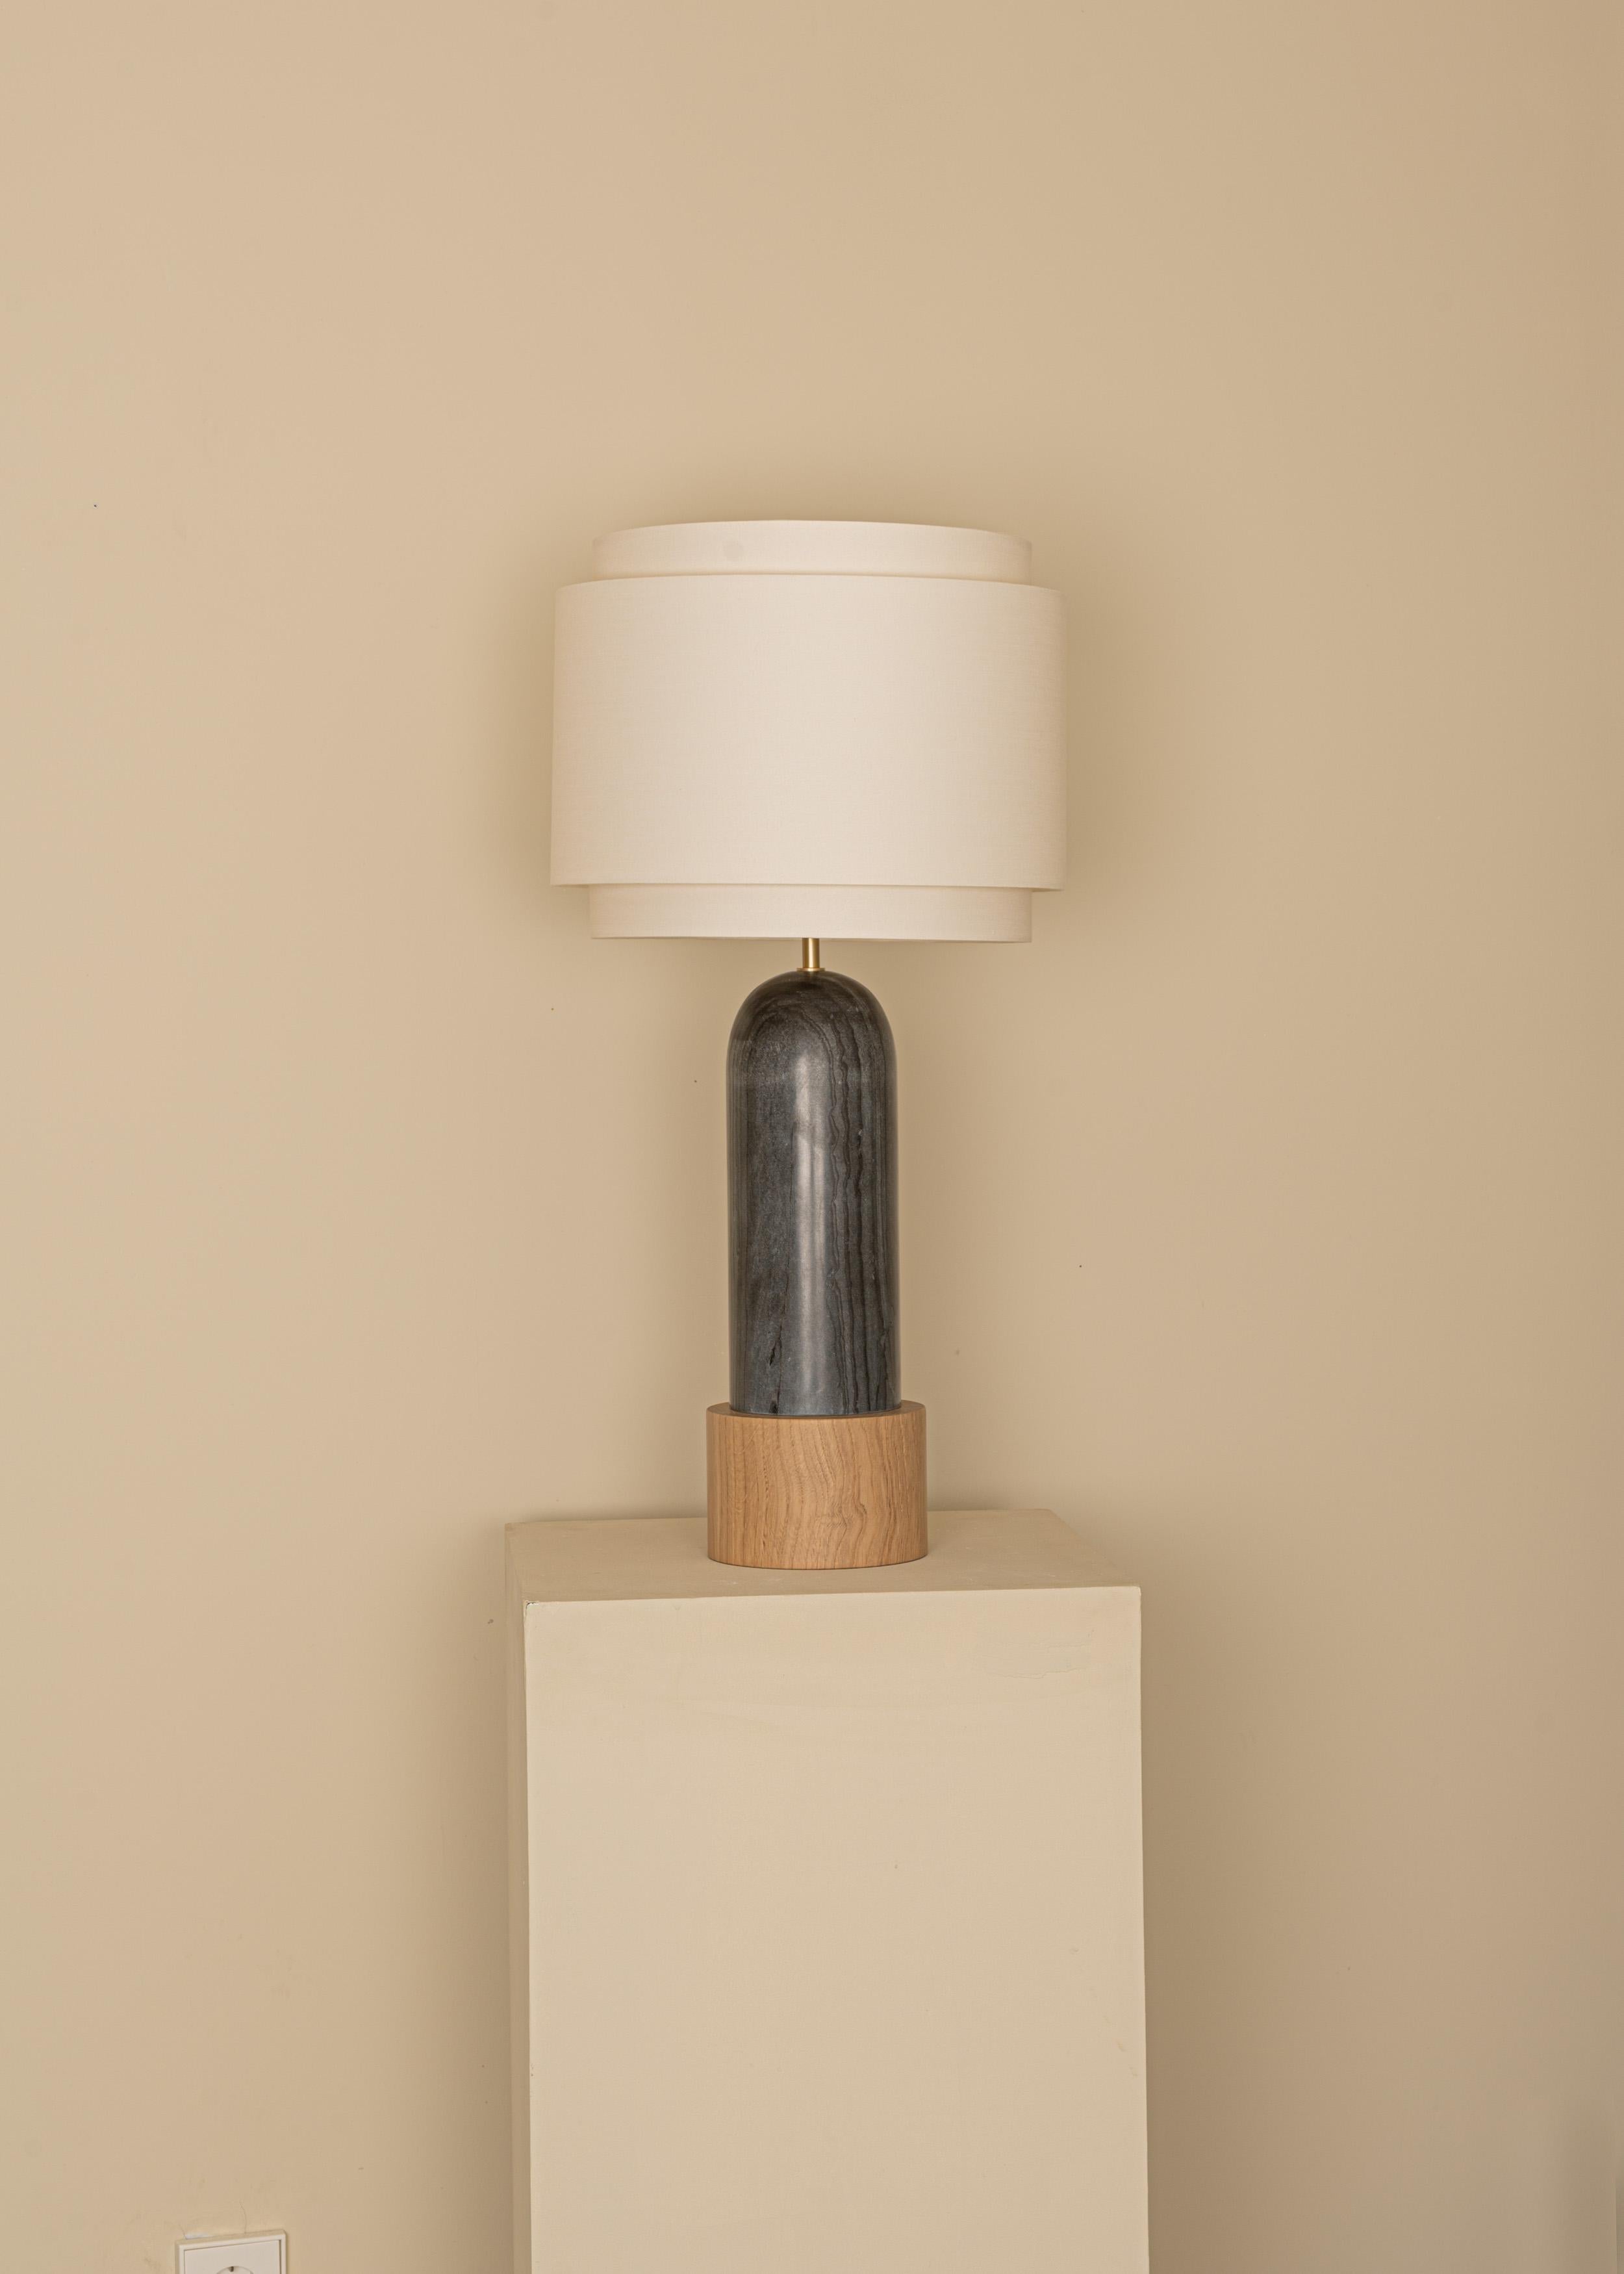 Black Marble And Oak Base Pura Kelo Double Table Lamp by Simone & Marcel
Dimensions: D 35 x W 35 x H 69 cm.
Materials: Brass, cotton, oak and black marble.

Also available in different marble, wood and alabaster options and finishes. Custom options